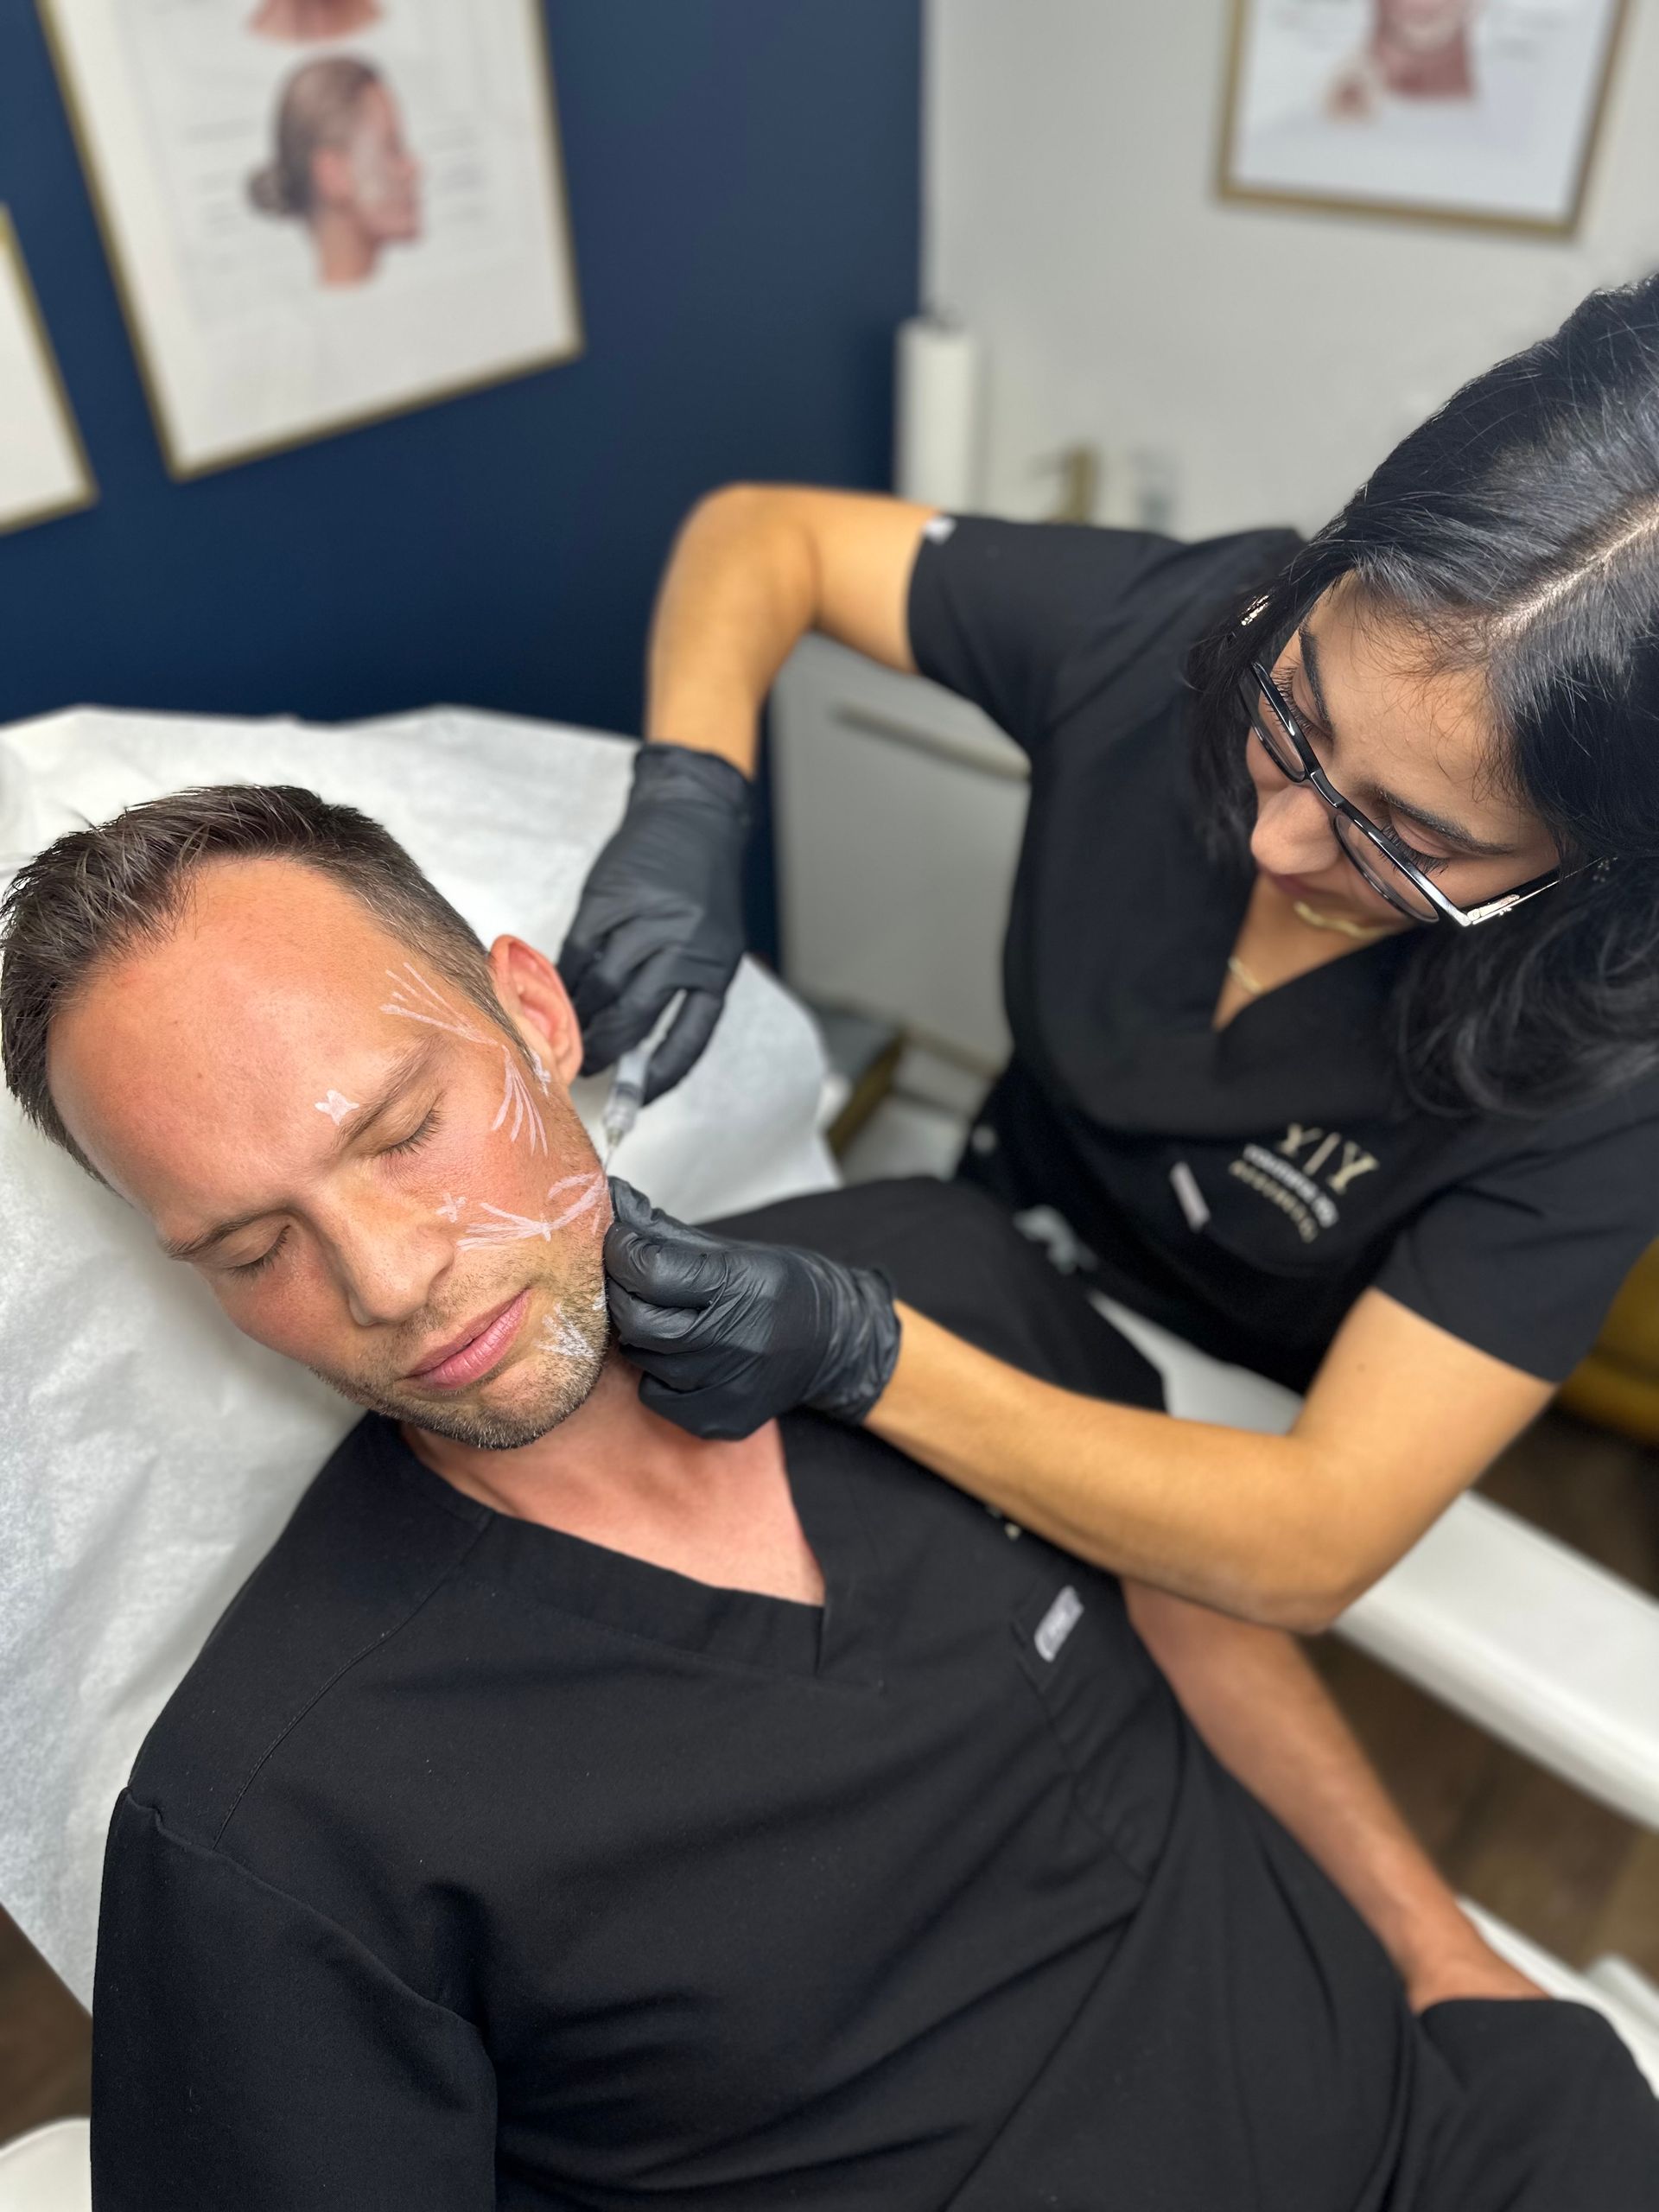 a woman is giving a man a botox treatment on his face .